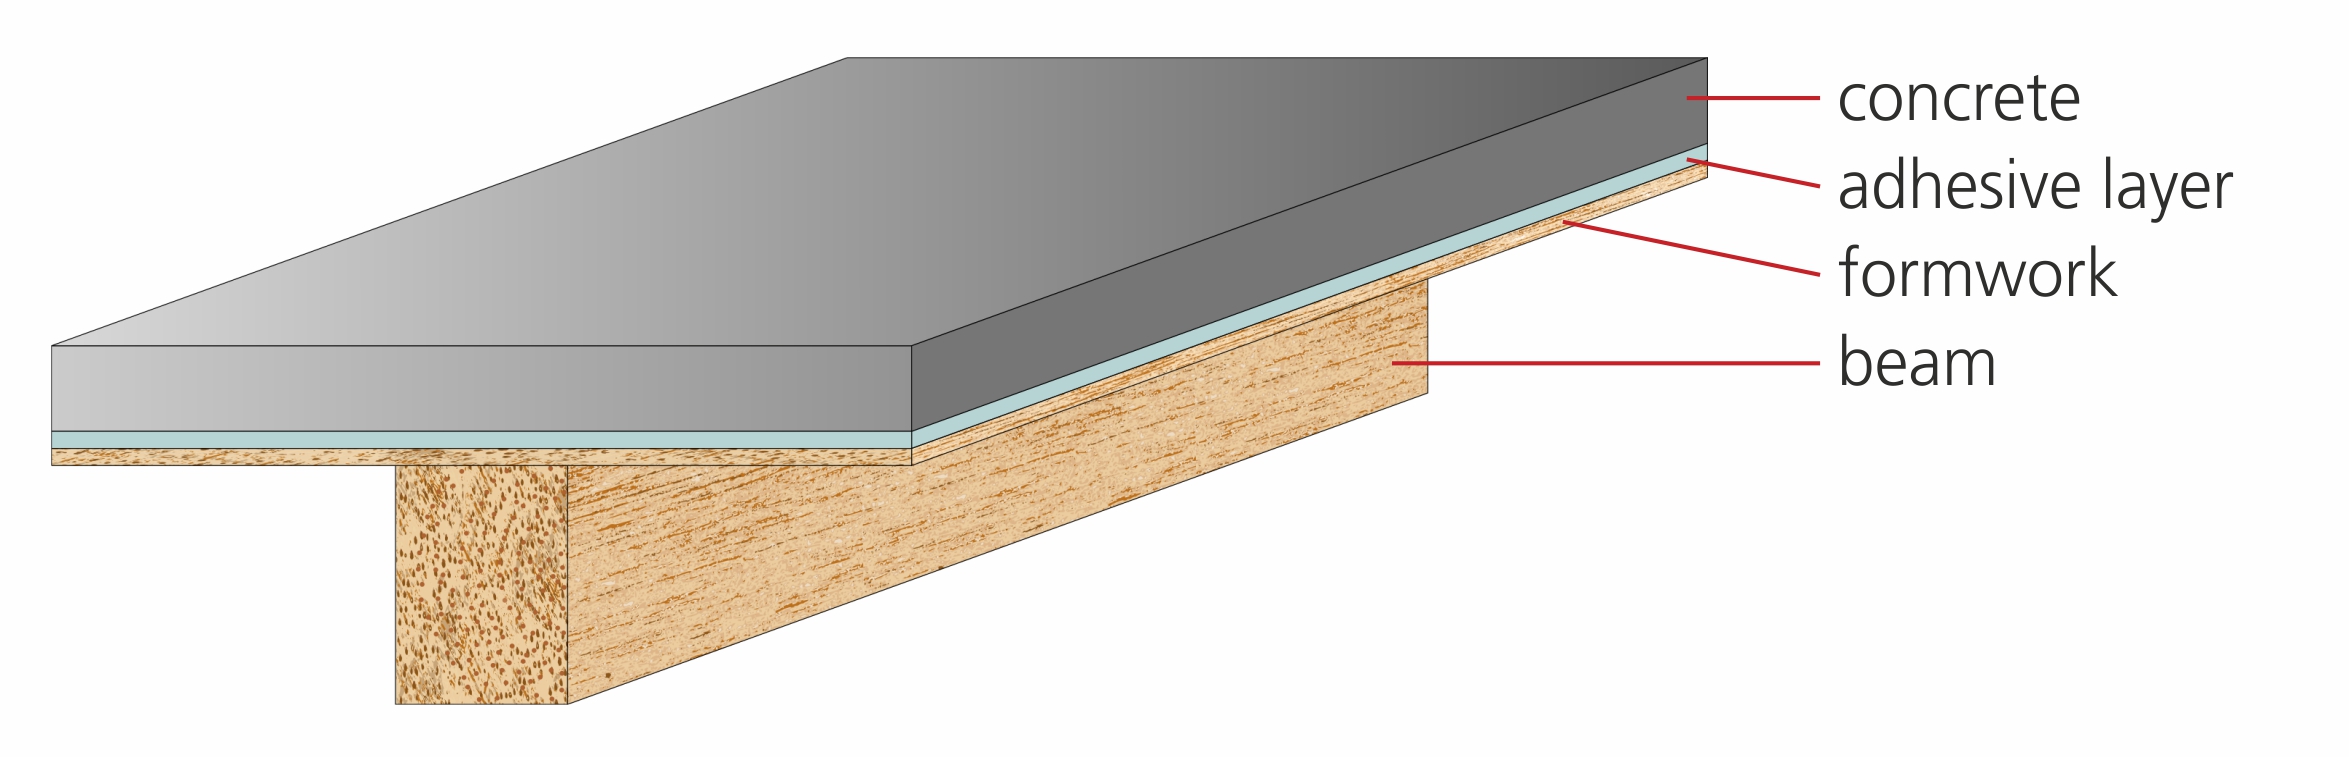 The computer graphic shows a wooden beam. On top of the beam is a slab composed of three layers (from bottom to top): wooden formwork, adhesive layer, concrete.